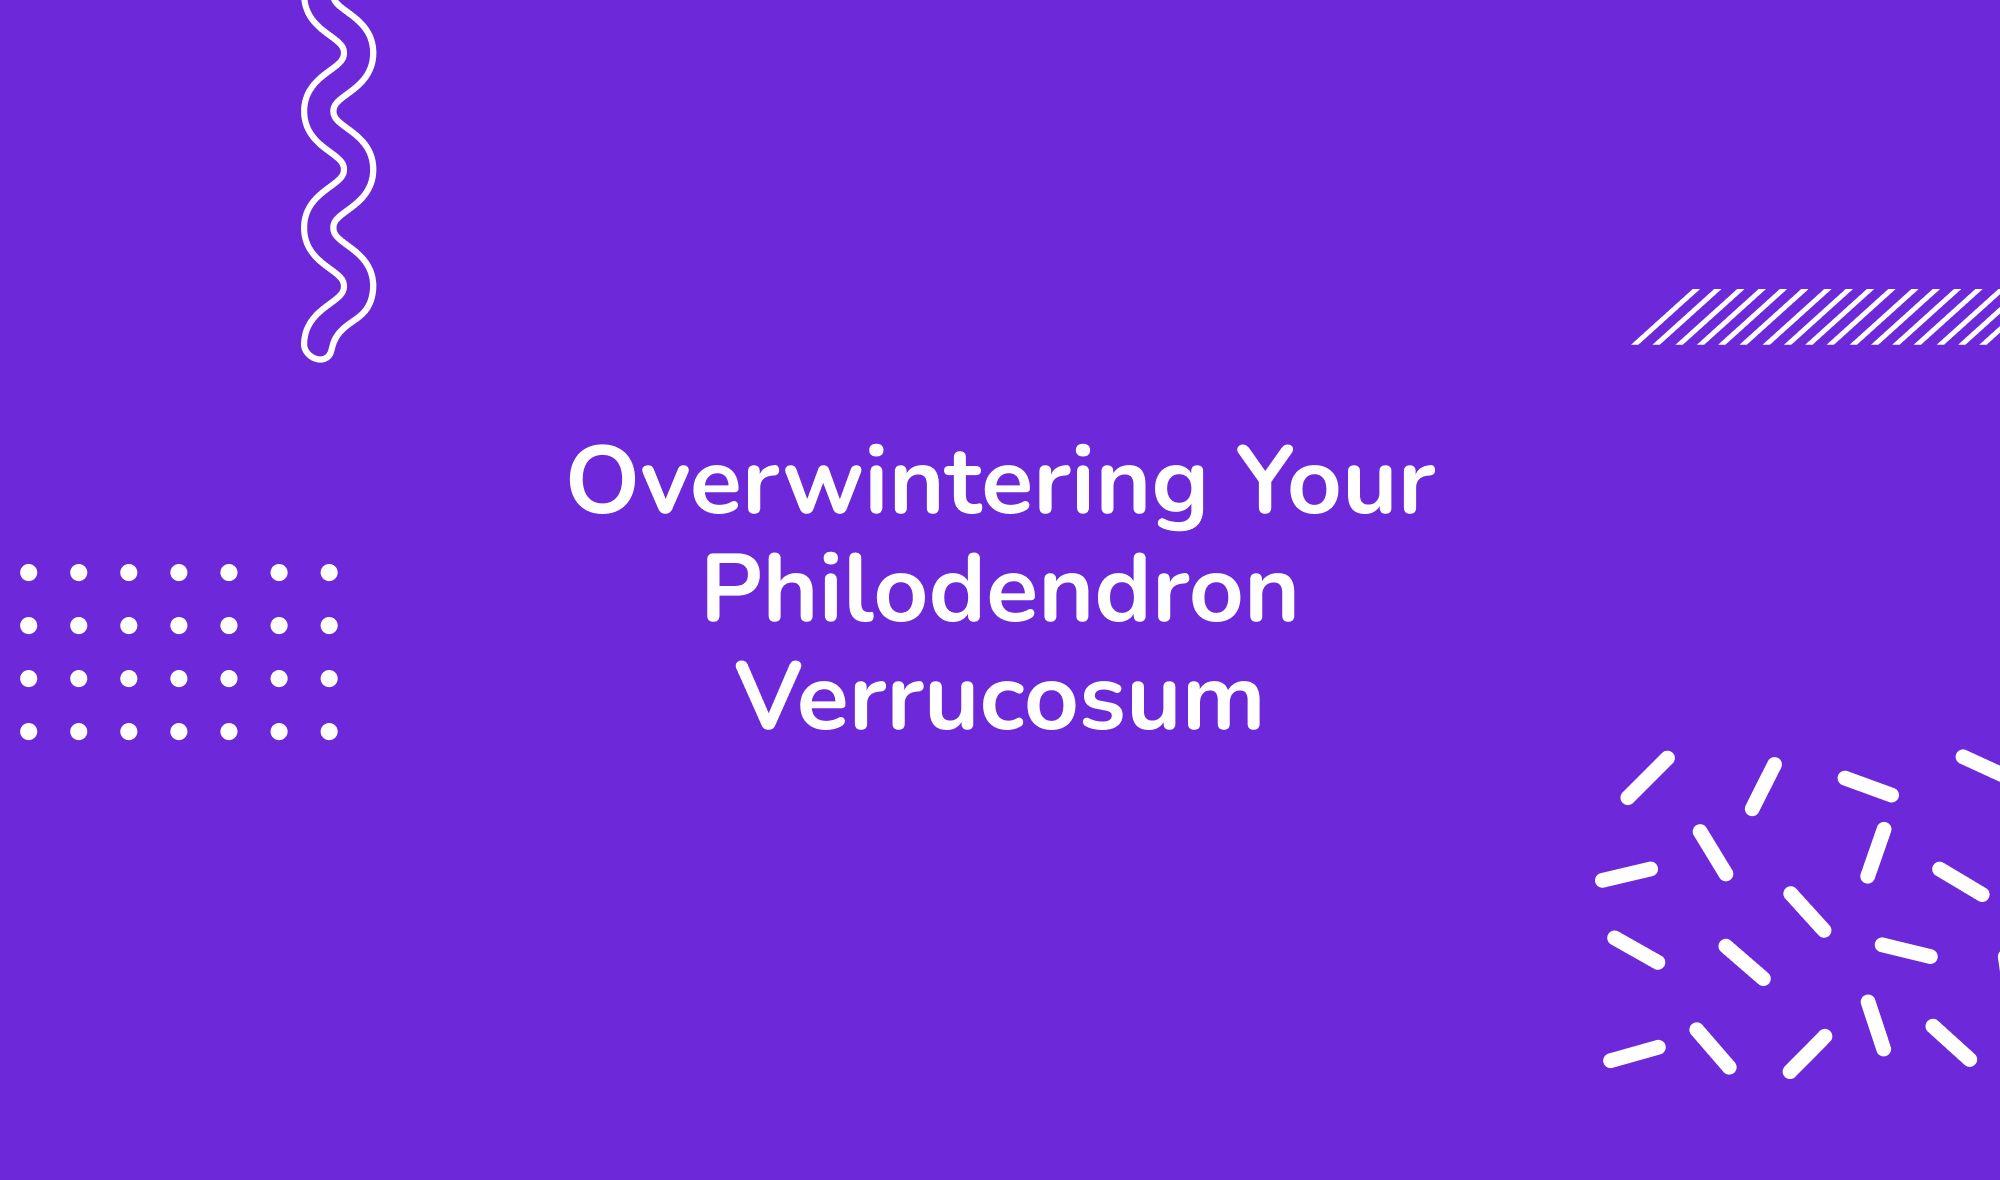 Overwintering Your Philodendron Verrucosum